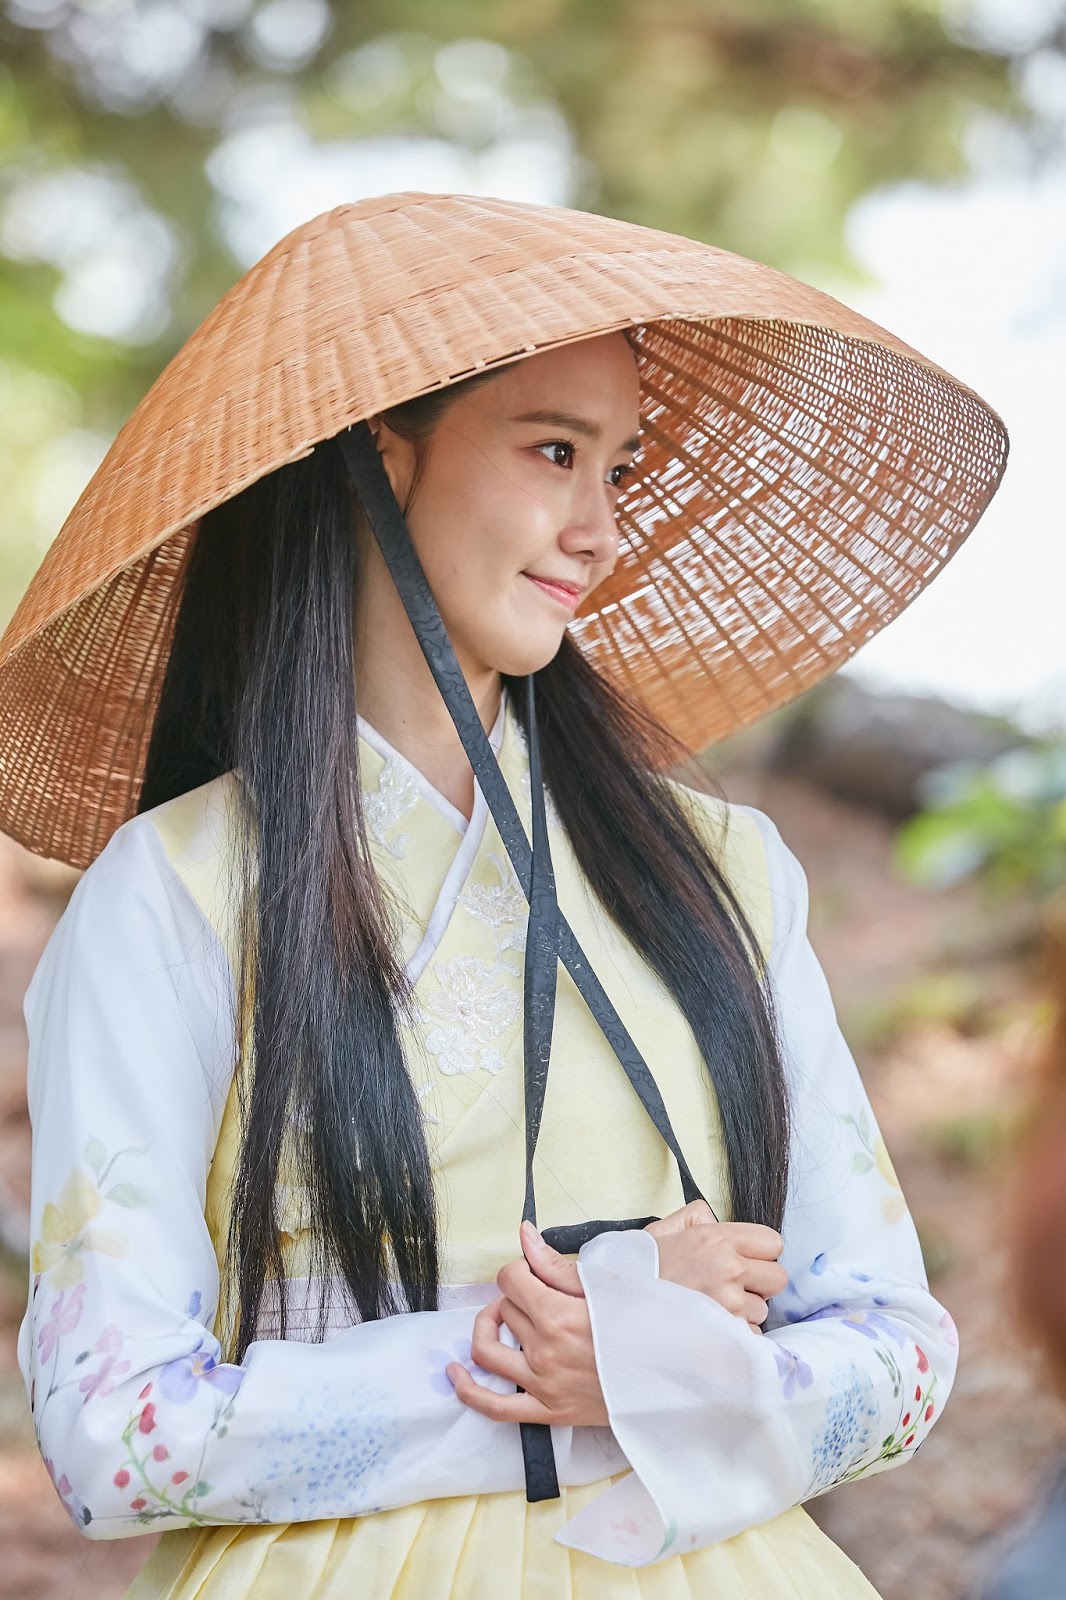 More of SNSD YoonA's charming stills from 'The King Loves' - Wonderful ...